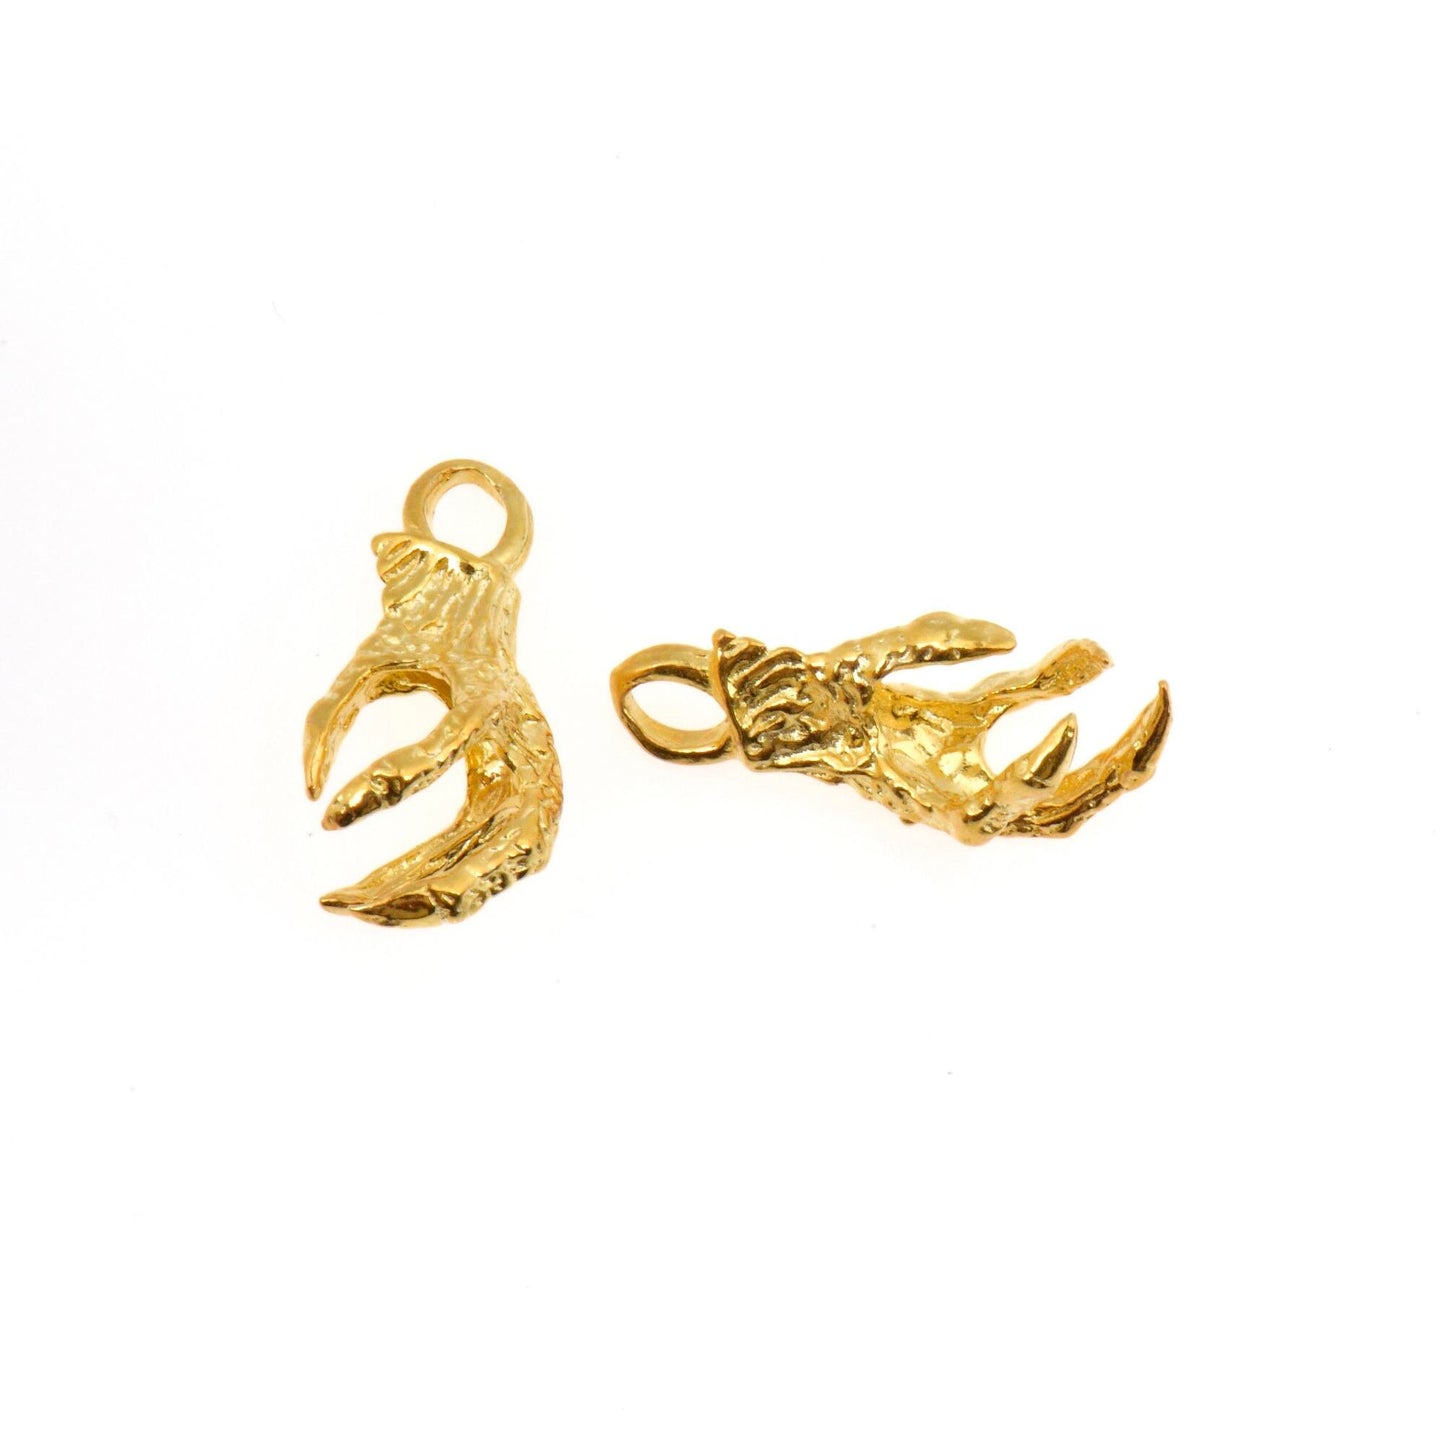 24K Gold Vermeil Eagle Claws, 925 Solid Silver Dragons Claw Charms, 24K Gold Plated Eagle Claw Pendant, Jewelry Making Findings, M/VM73